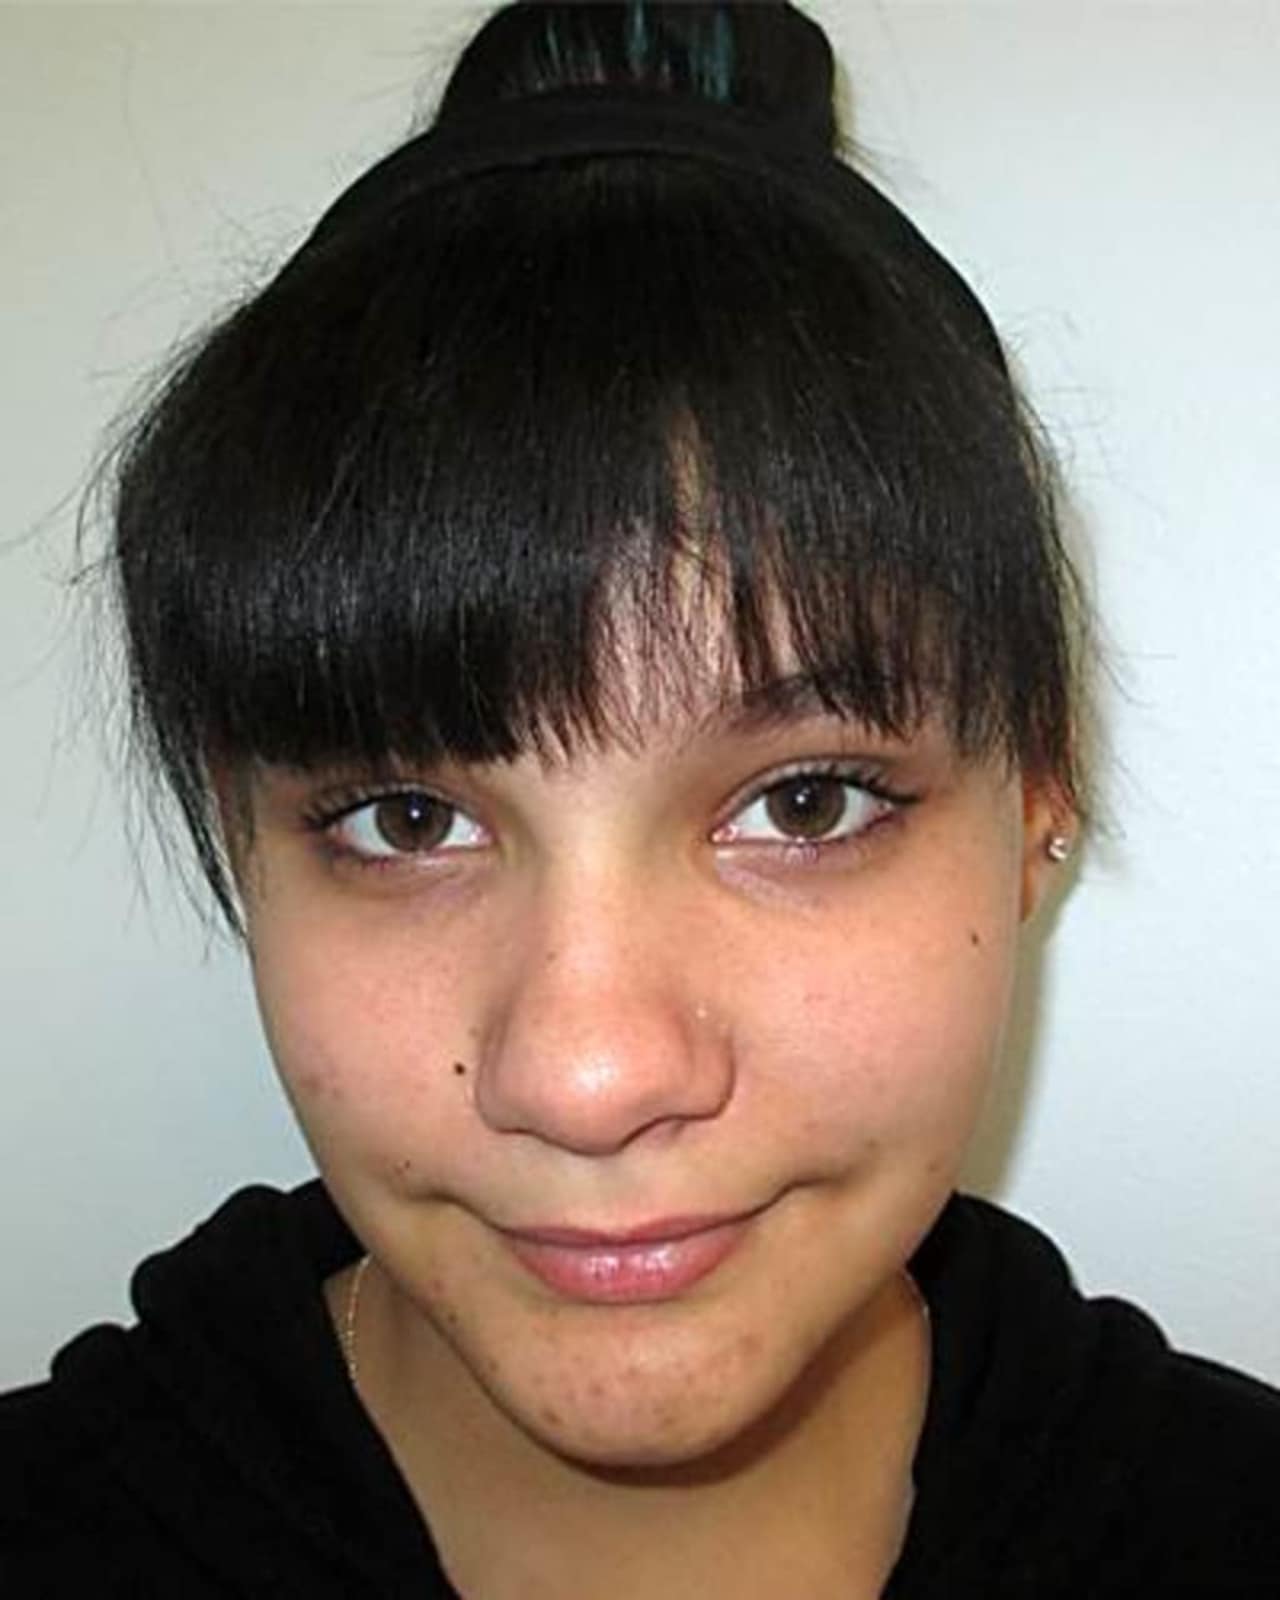 Wanda Bautista, 15, was reported missing in Poughkeepsie in March.